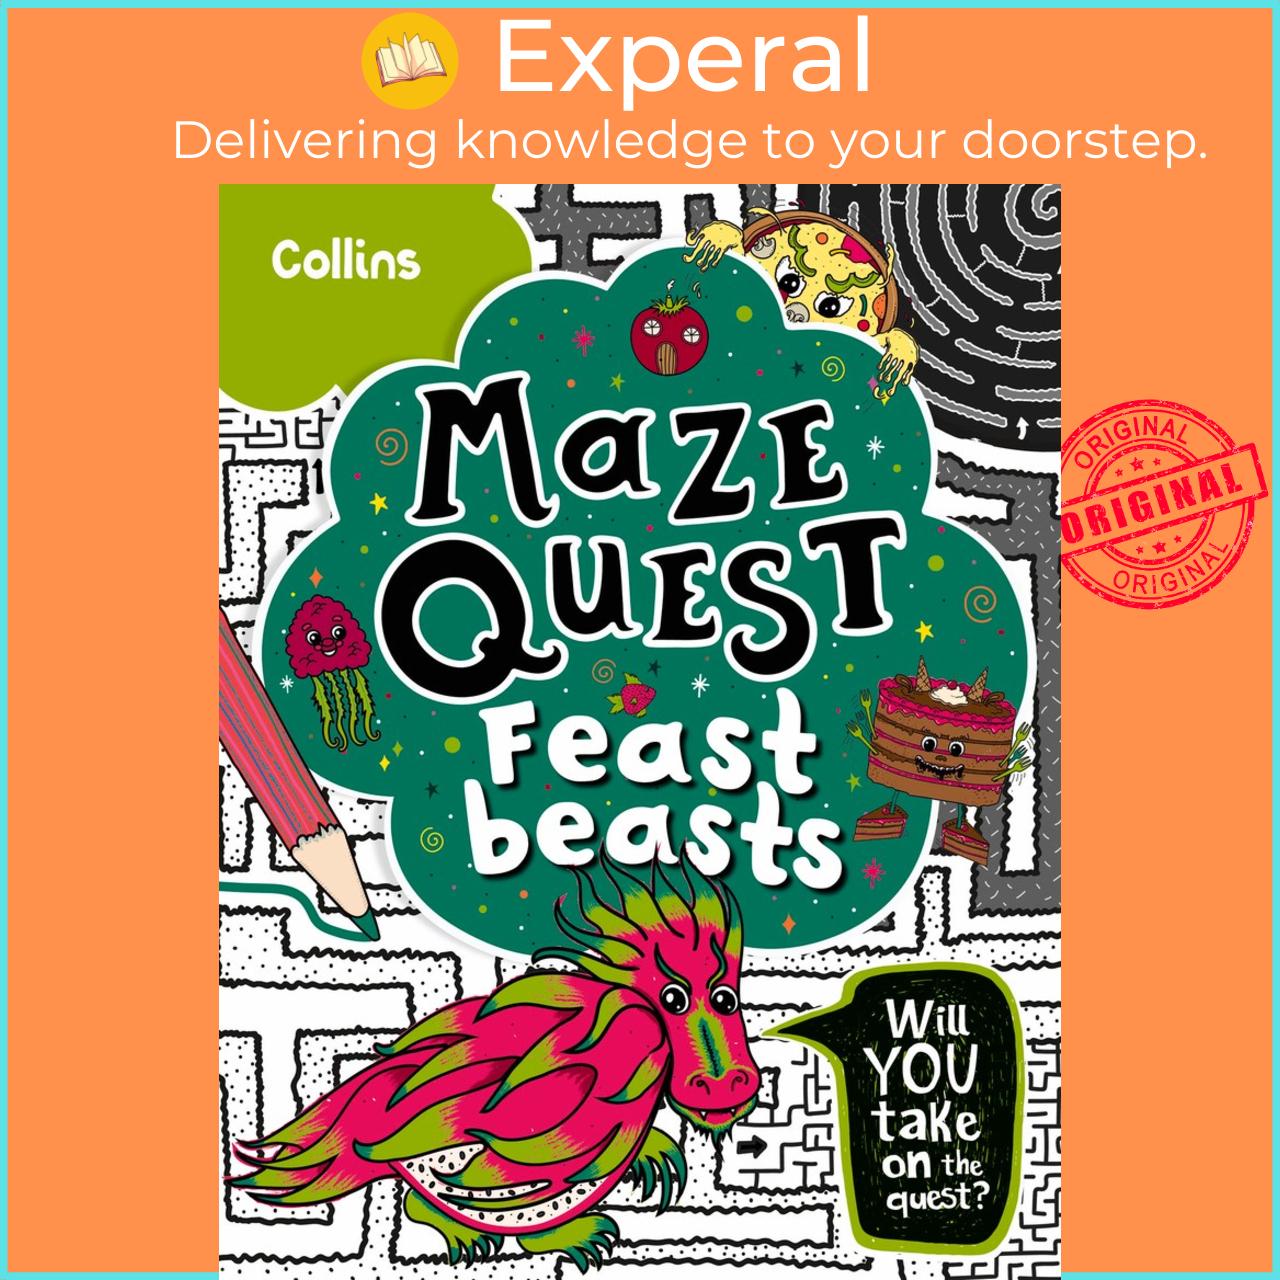 Sách - Feast Beasts - Solve 50 Mazes in This Adventure Story for Kids Ag by Kia Marie Hunt (UK edition, Trade Paperback)